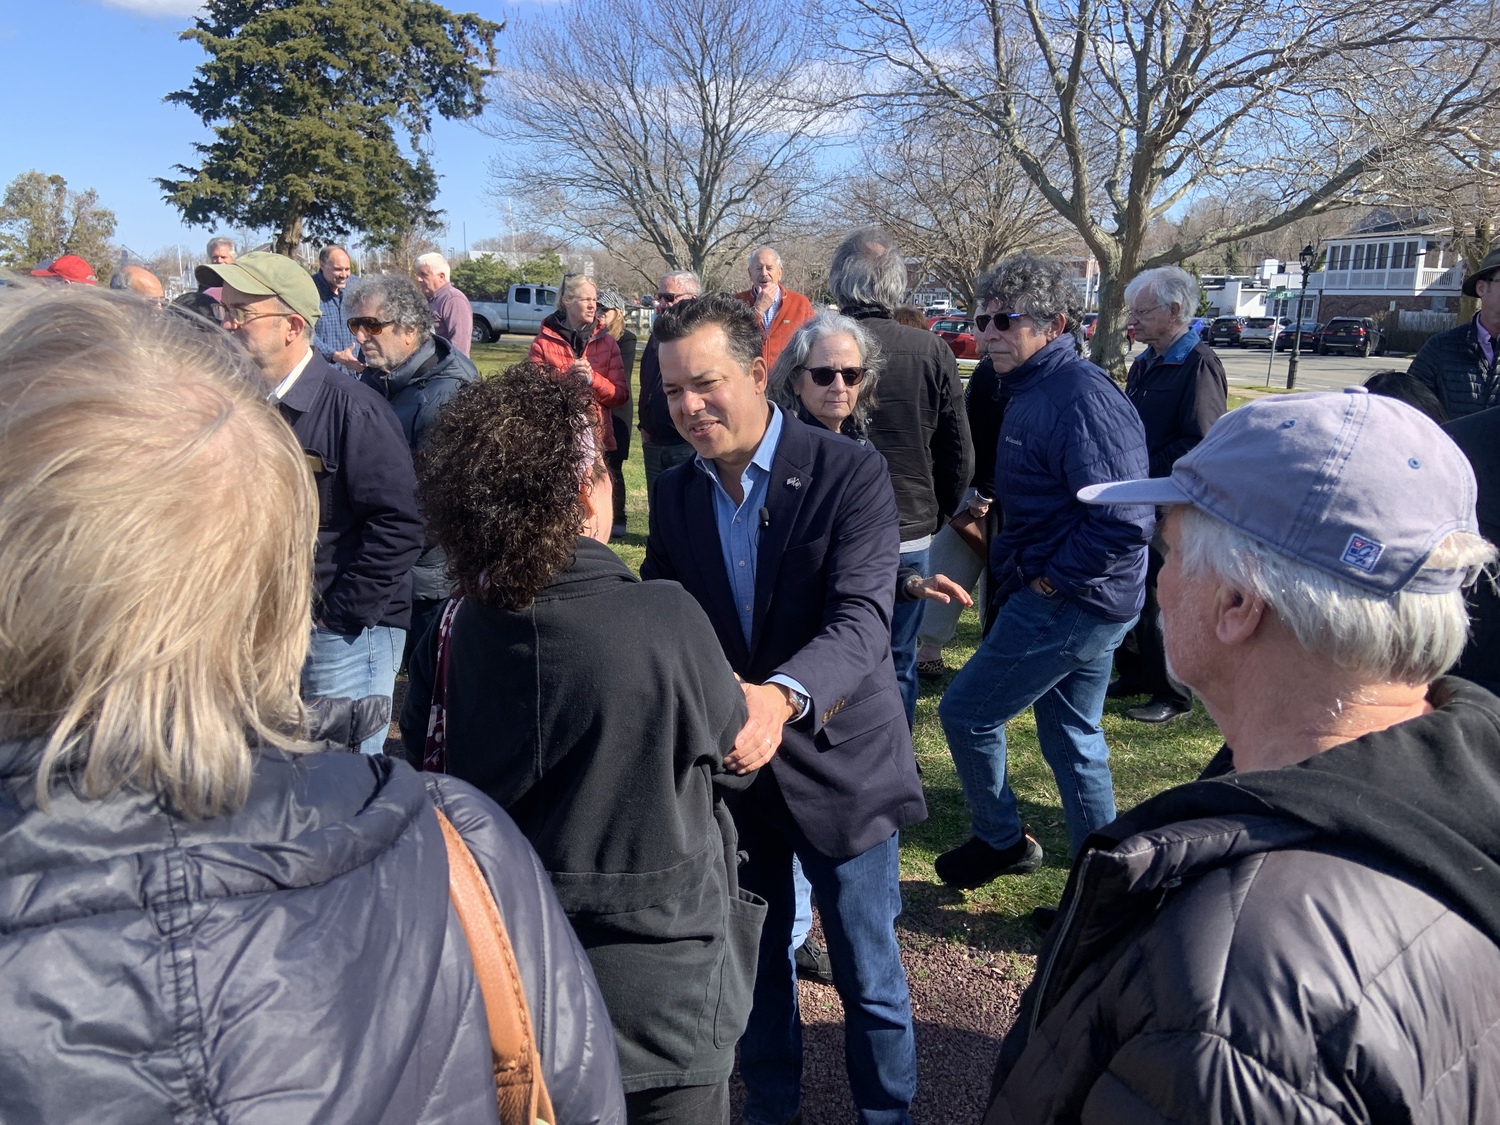 Democratic congressional candidate John Avlon greets well wishers after kicking off his campaign in Sag Harbor on Saturday. STEPHEN J. KOTZ